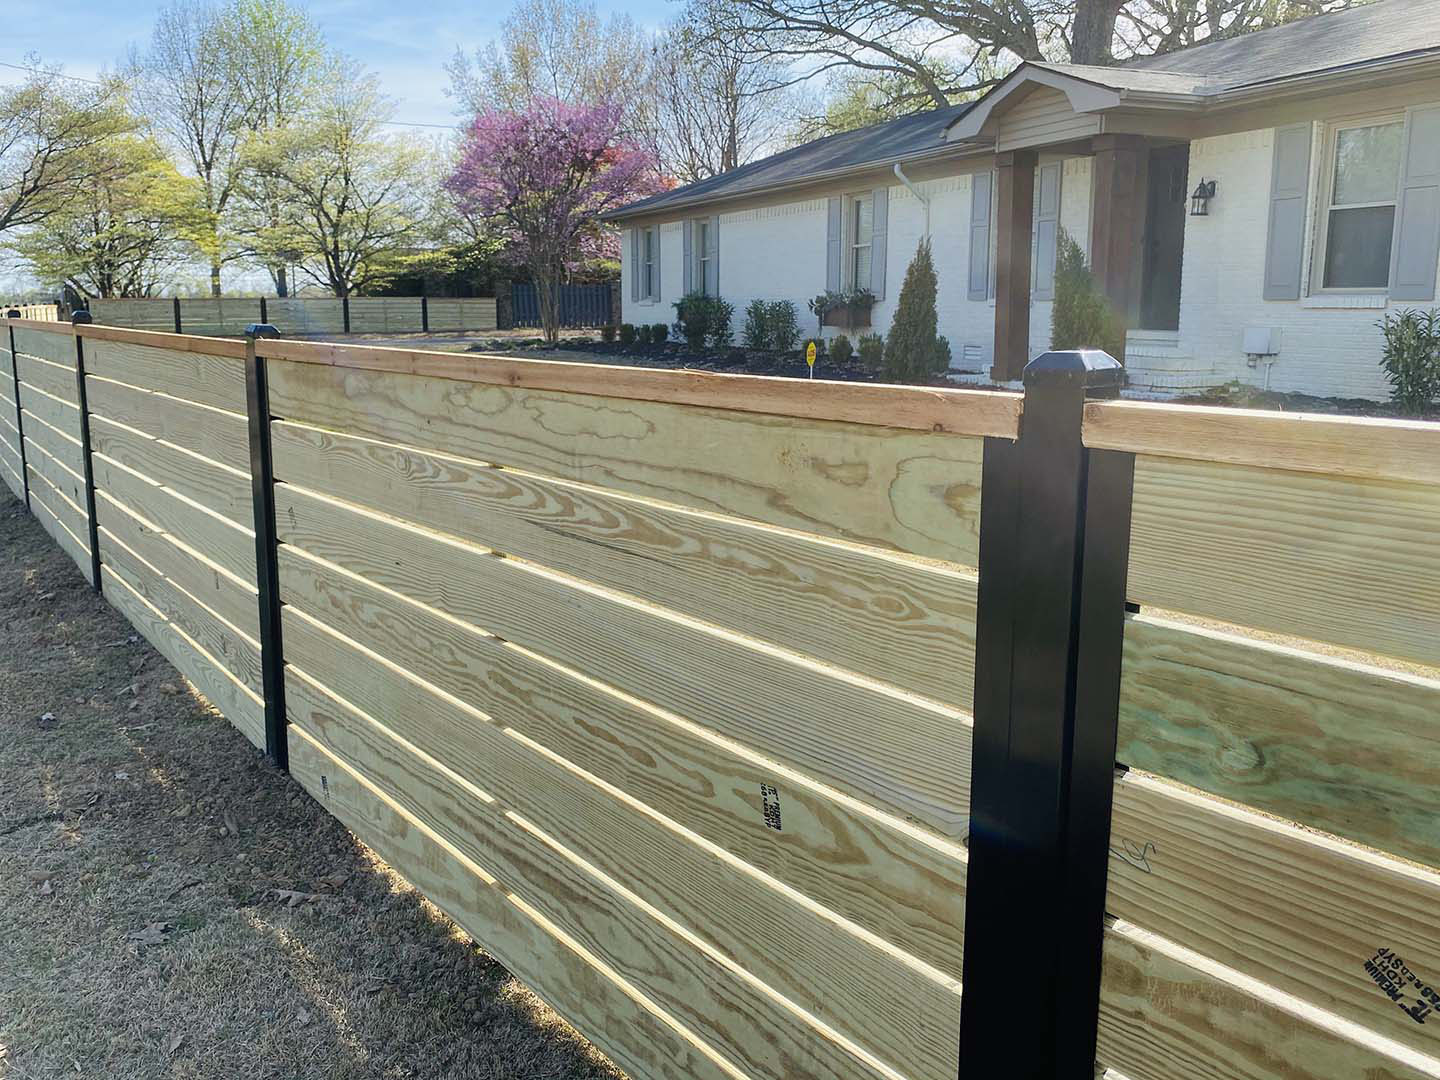 Paris Tennessee residential fencing company